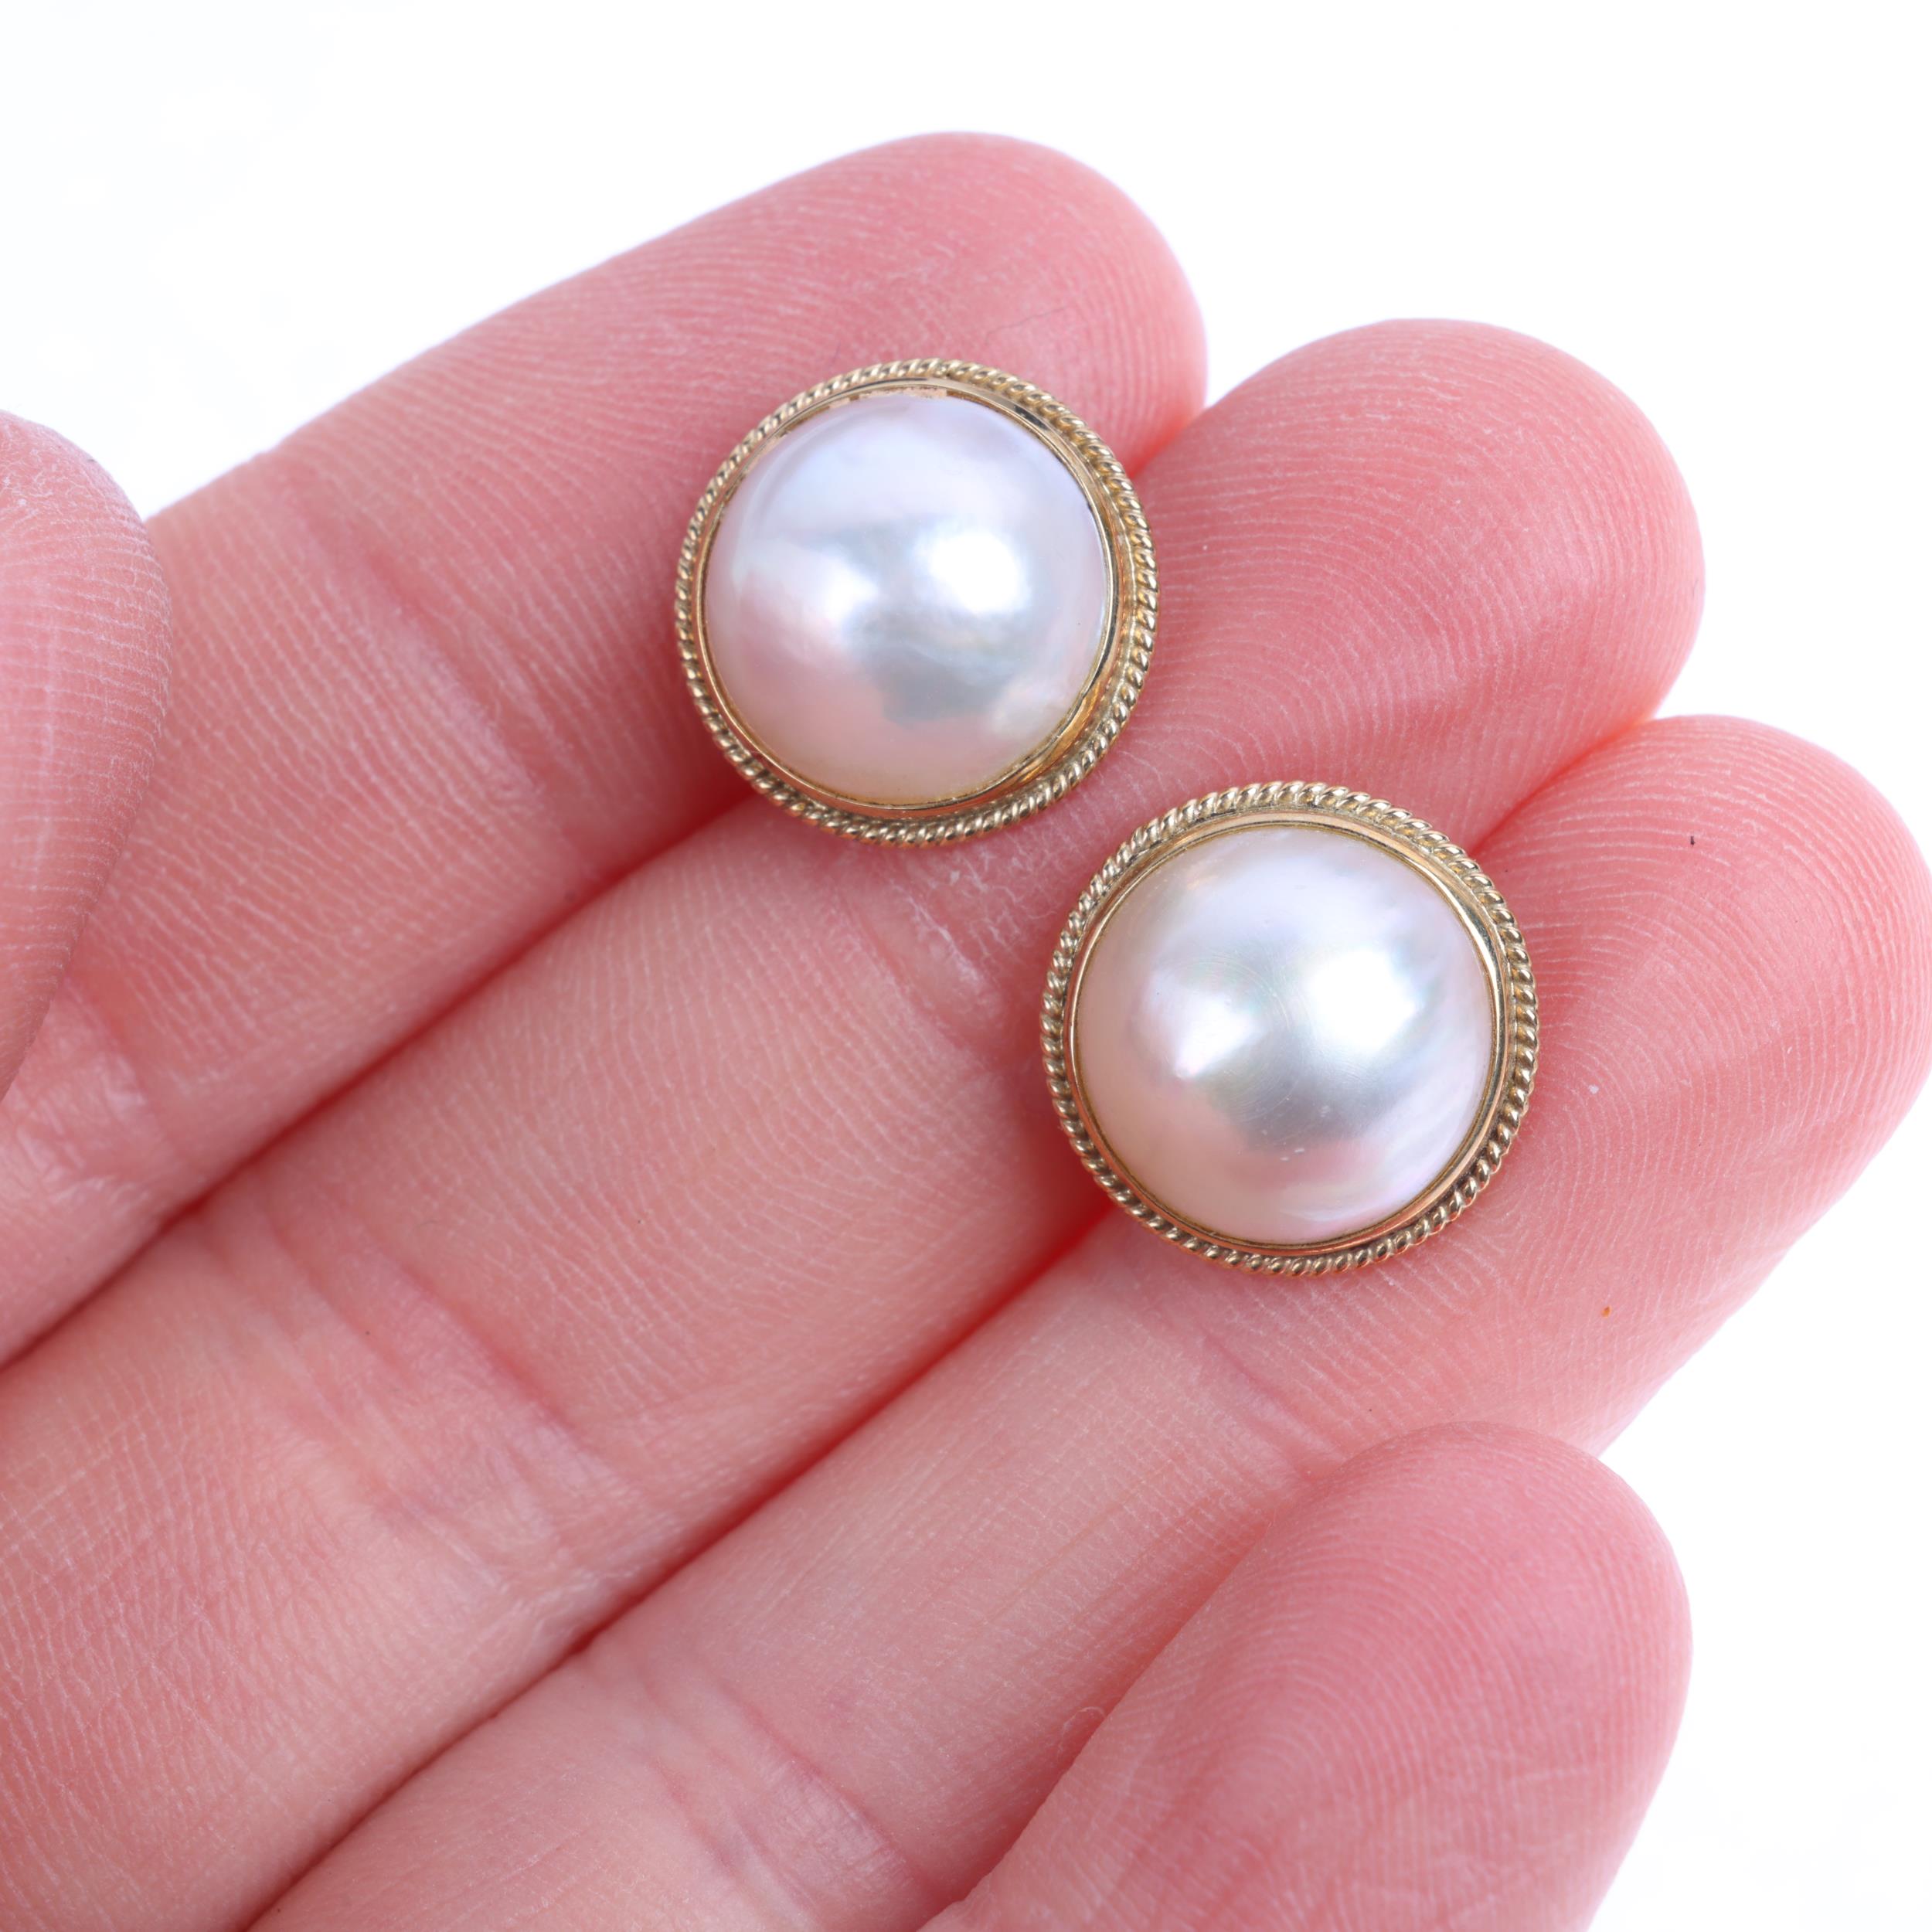 A 9ct gold Mabe pearl pendant and earring set, pendant 20mm, stud earrings 13.3mm, 5g total (2) - Image 4 of 4